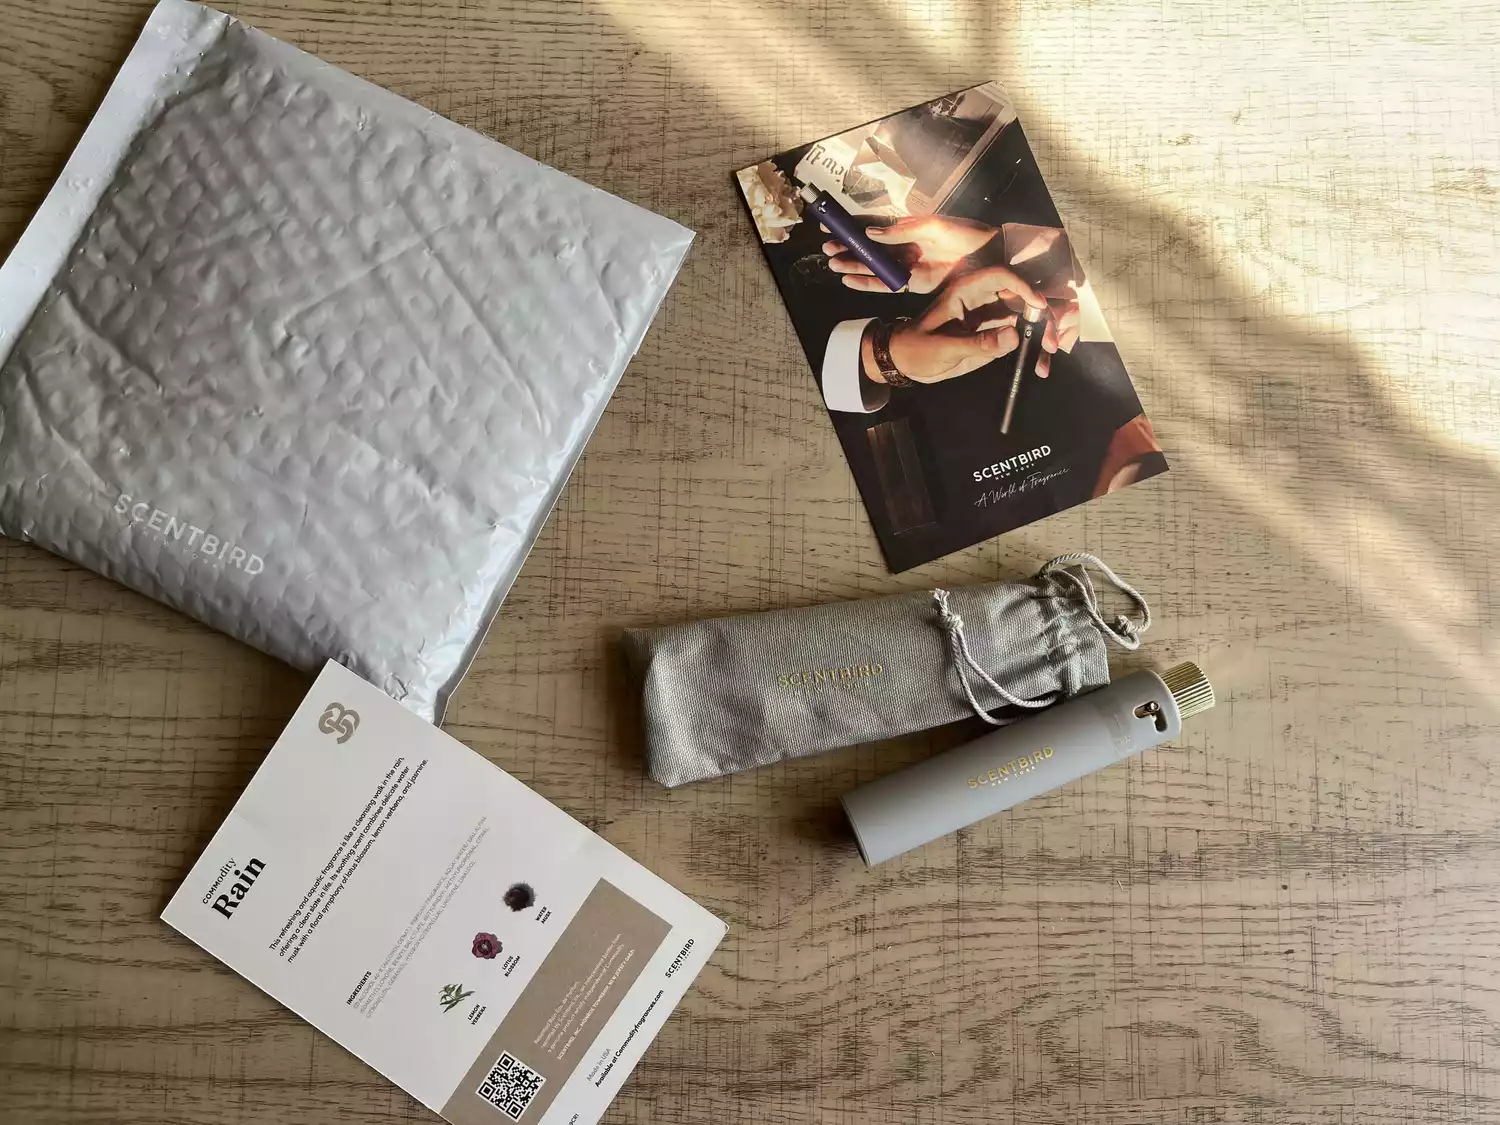 scentbird packaging and products